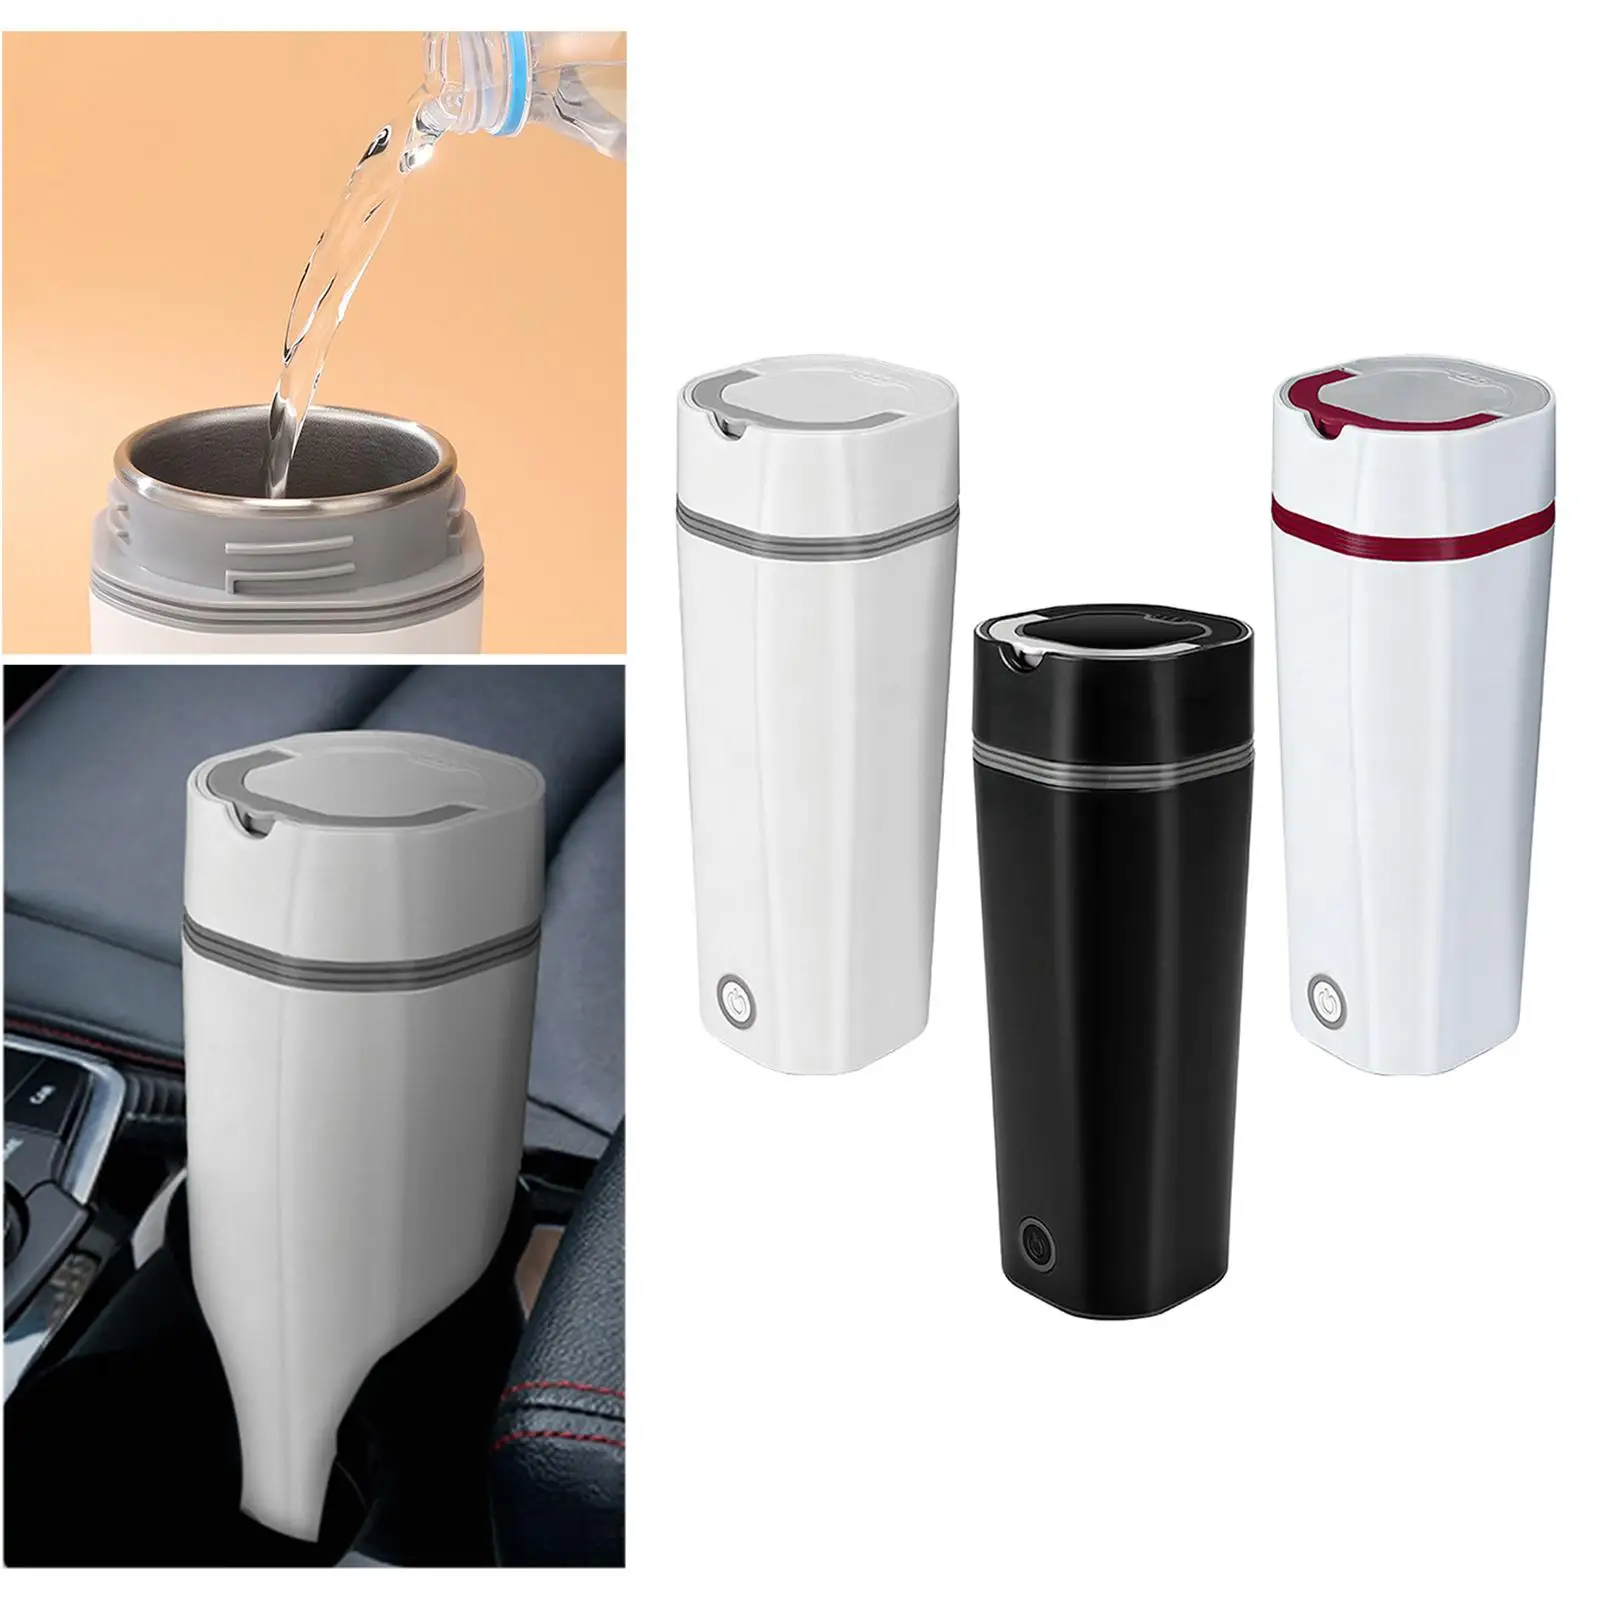 Heating Water Cup 350ml 12V 304 Stainless Steel Mini Electric Car Kettle Travel Kettle Fits for Tea Coffee Milk Camping Caravan